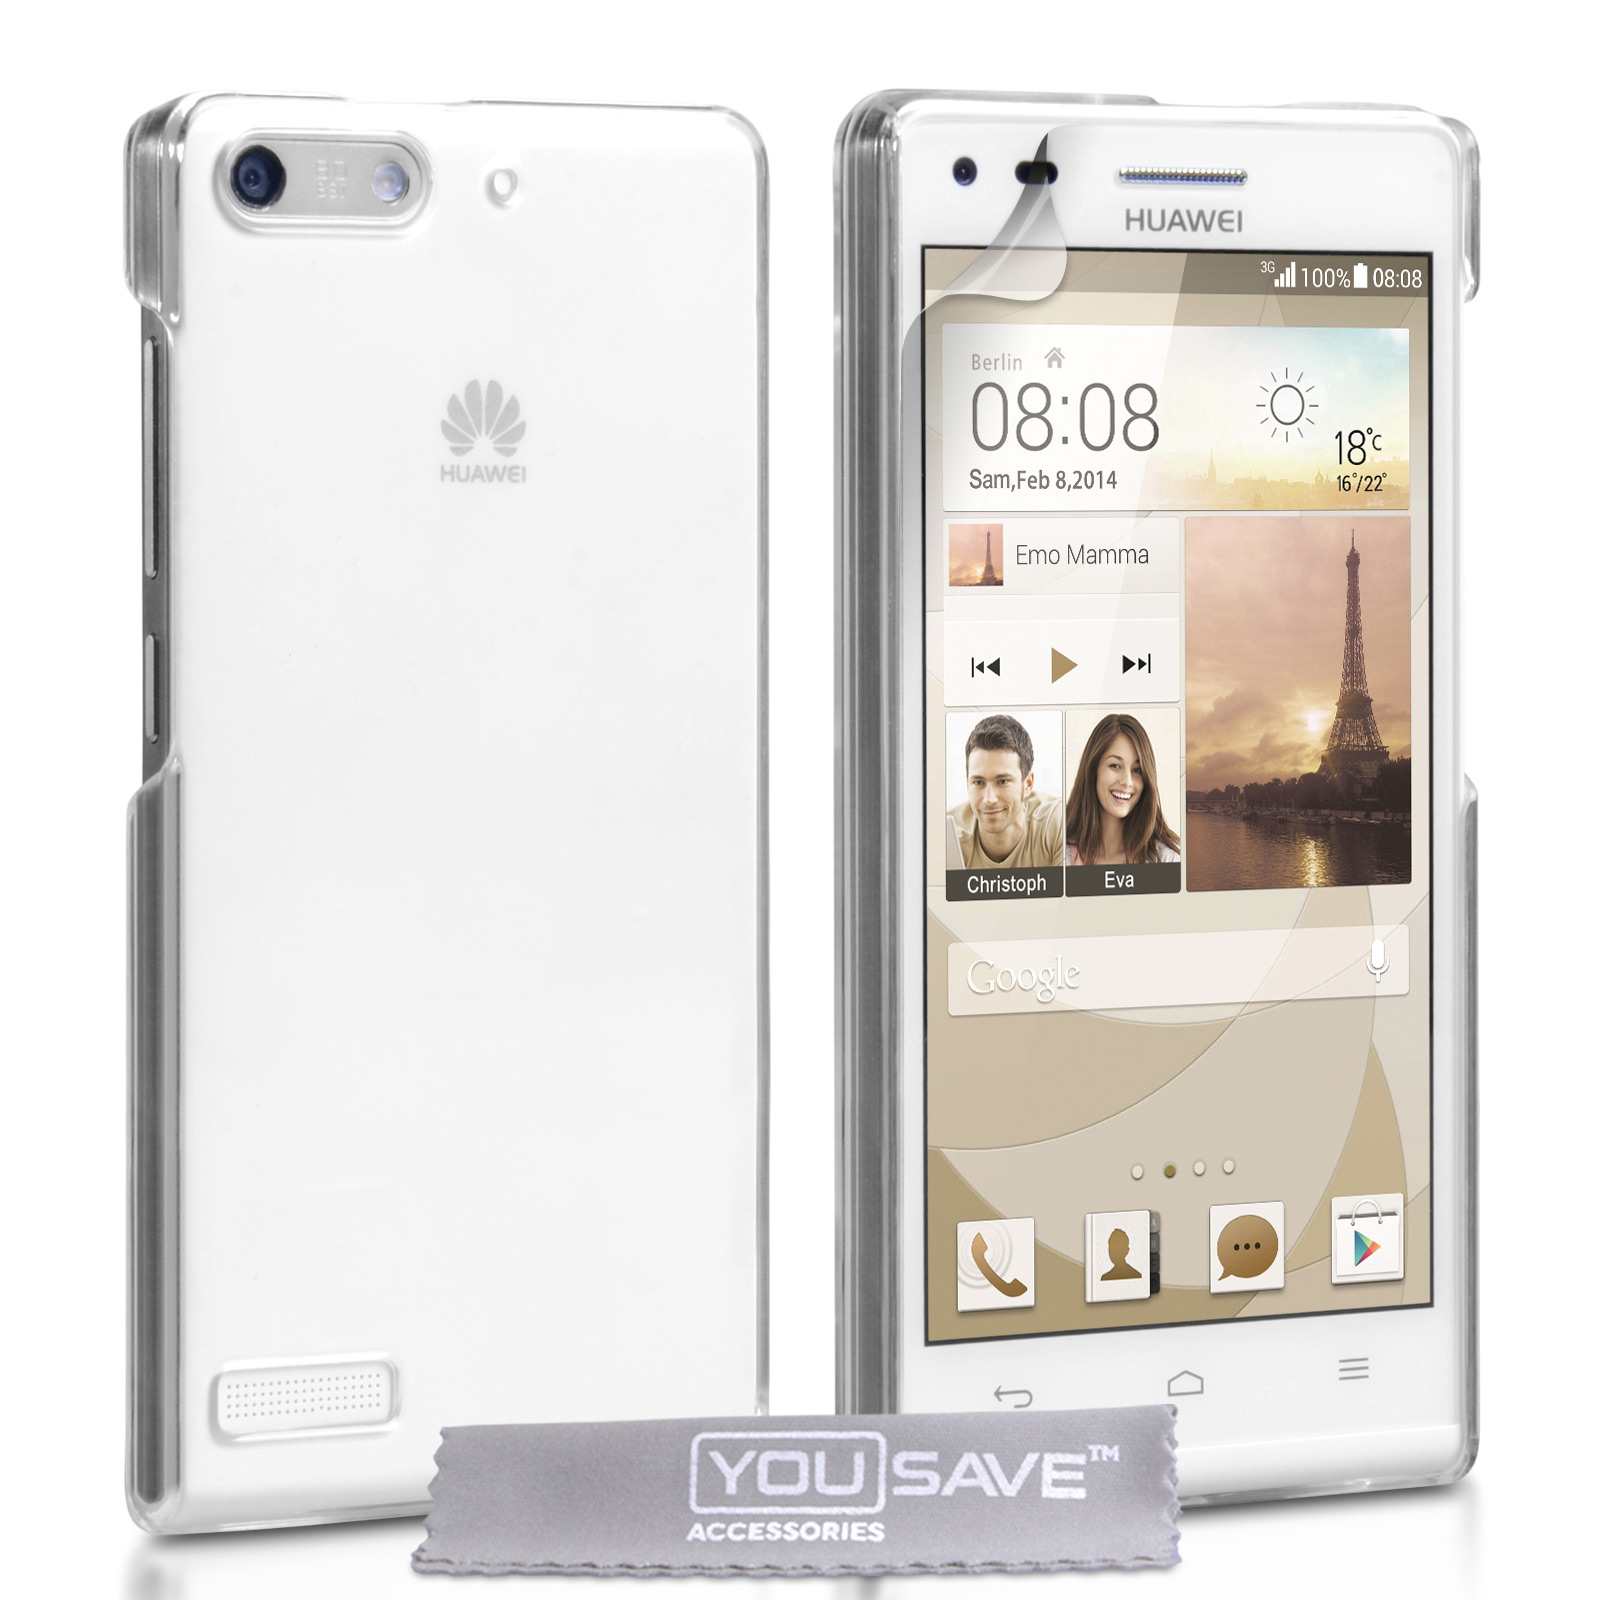 voedsel Bevestiging site YouSave Accessories Huawei Ascend G6 Hard Case - Crystal Clear